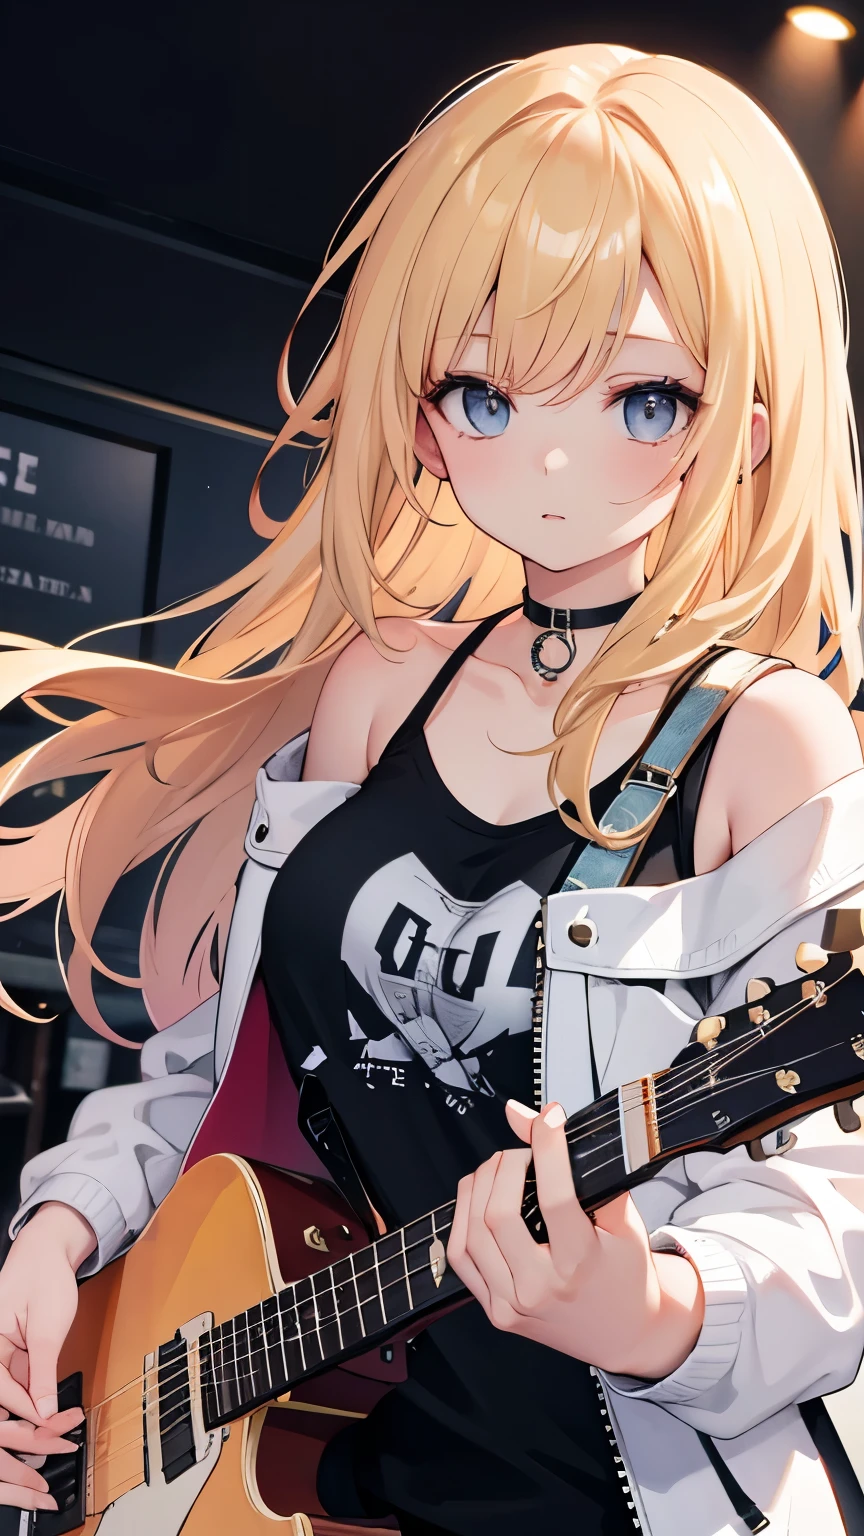 blonde hair, hair over shoulder, messy hair, masterpiece, (textured skin), best quality, gorgeous adult woman, (Rock band guitarist), T-shirt, leisure jacket, choker, (electric guitar), Fender, (at Live venue)